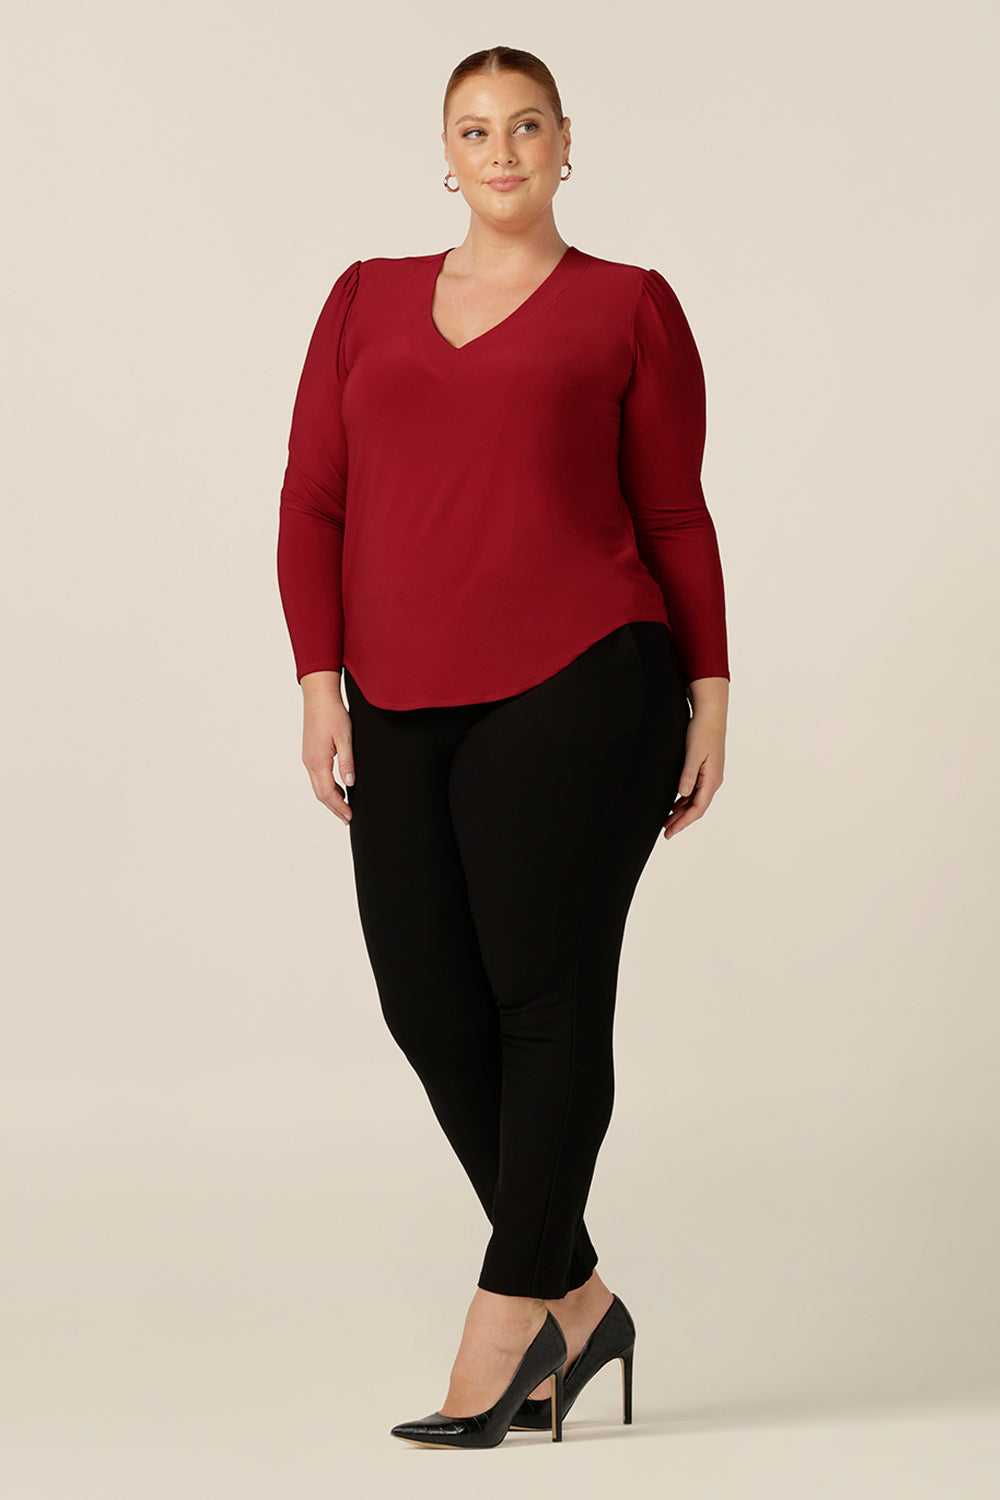 The perfect top for workwear and casual style, the Glyn Top in Flame red jersey features a V neck, shirttail hemline and long sleeves. Worn with slim leg work pants, this is a good top for corporate and event dressing. 